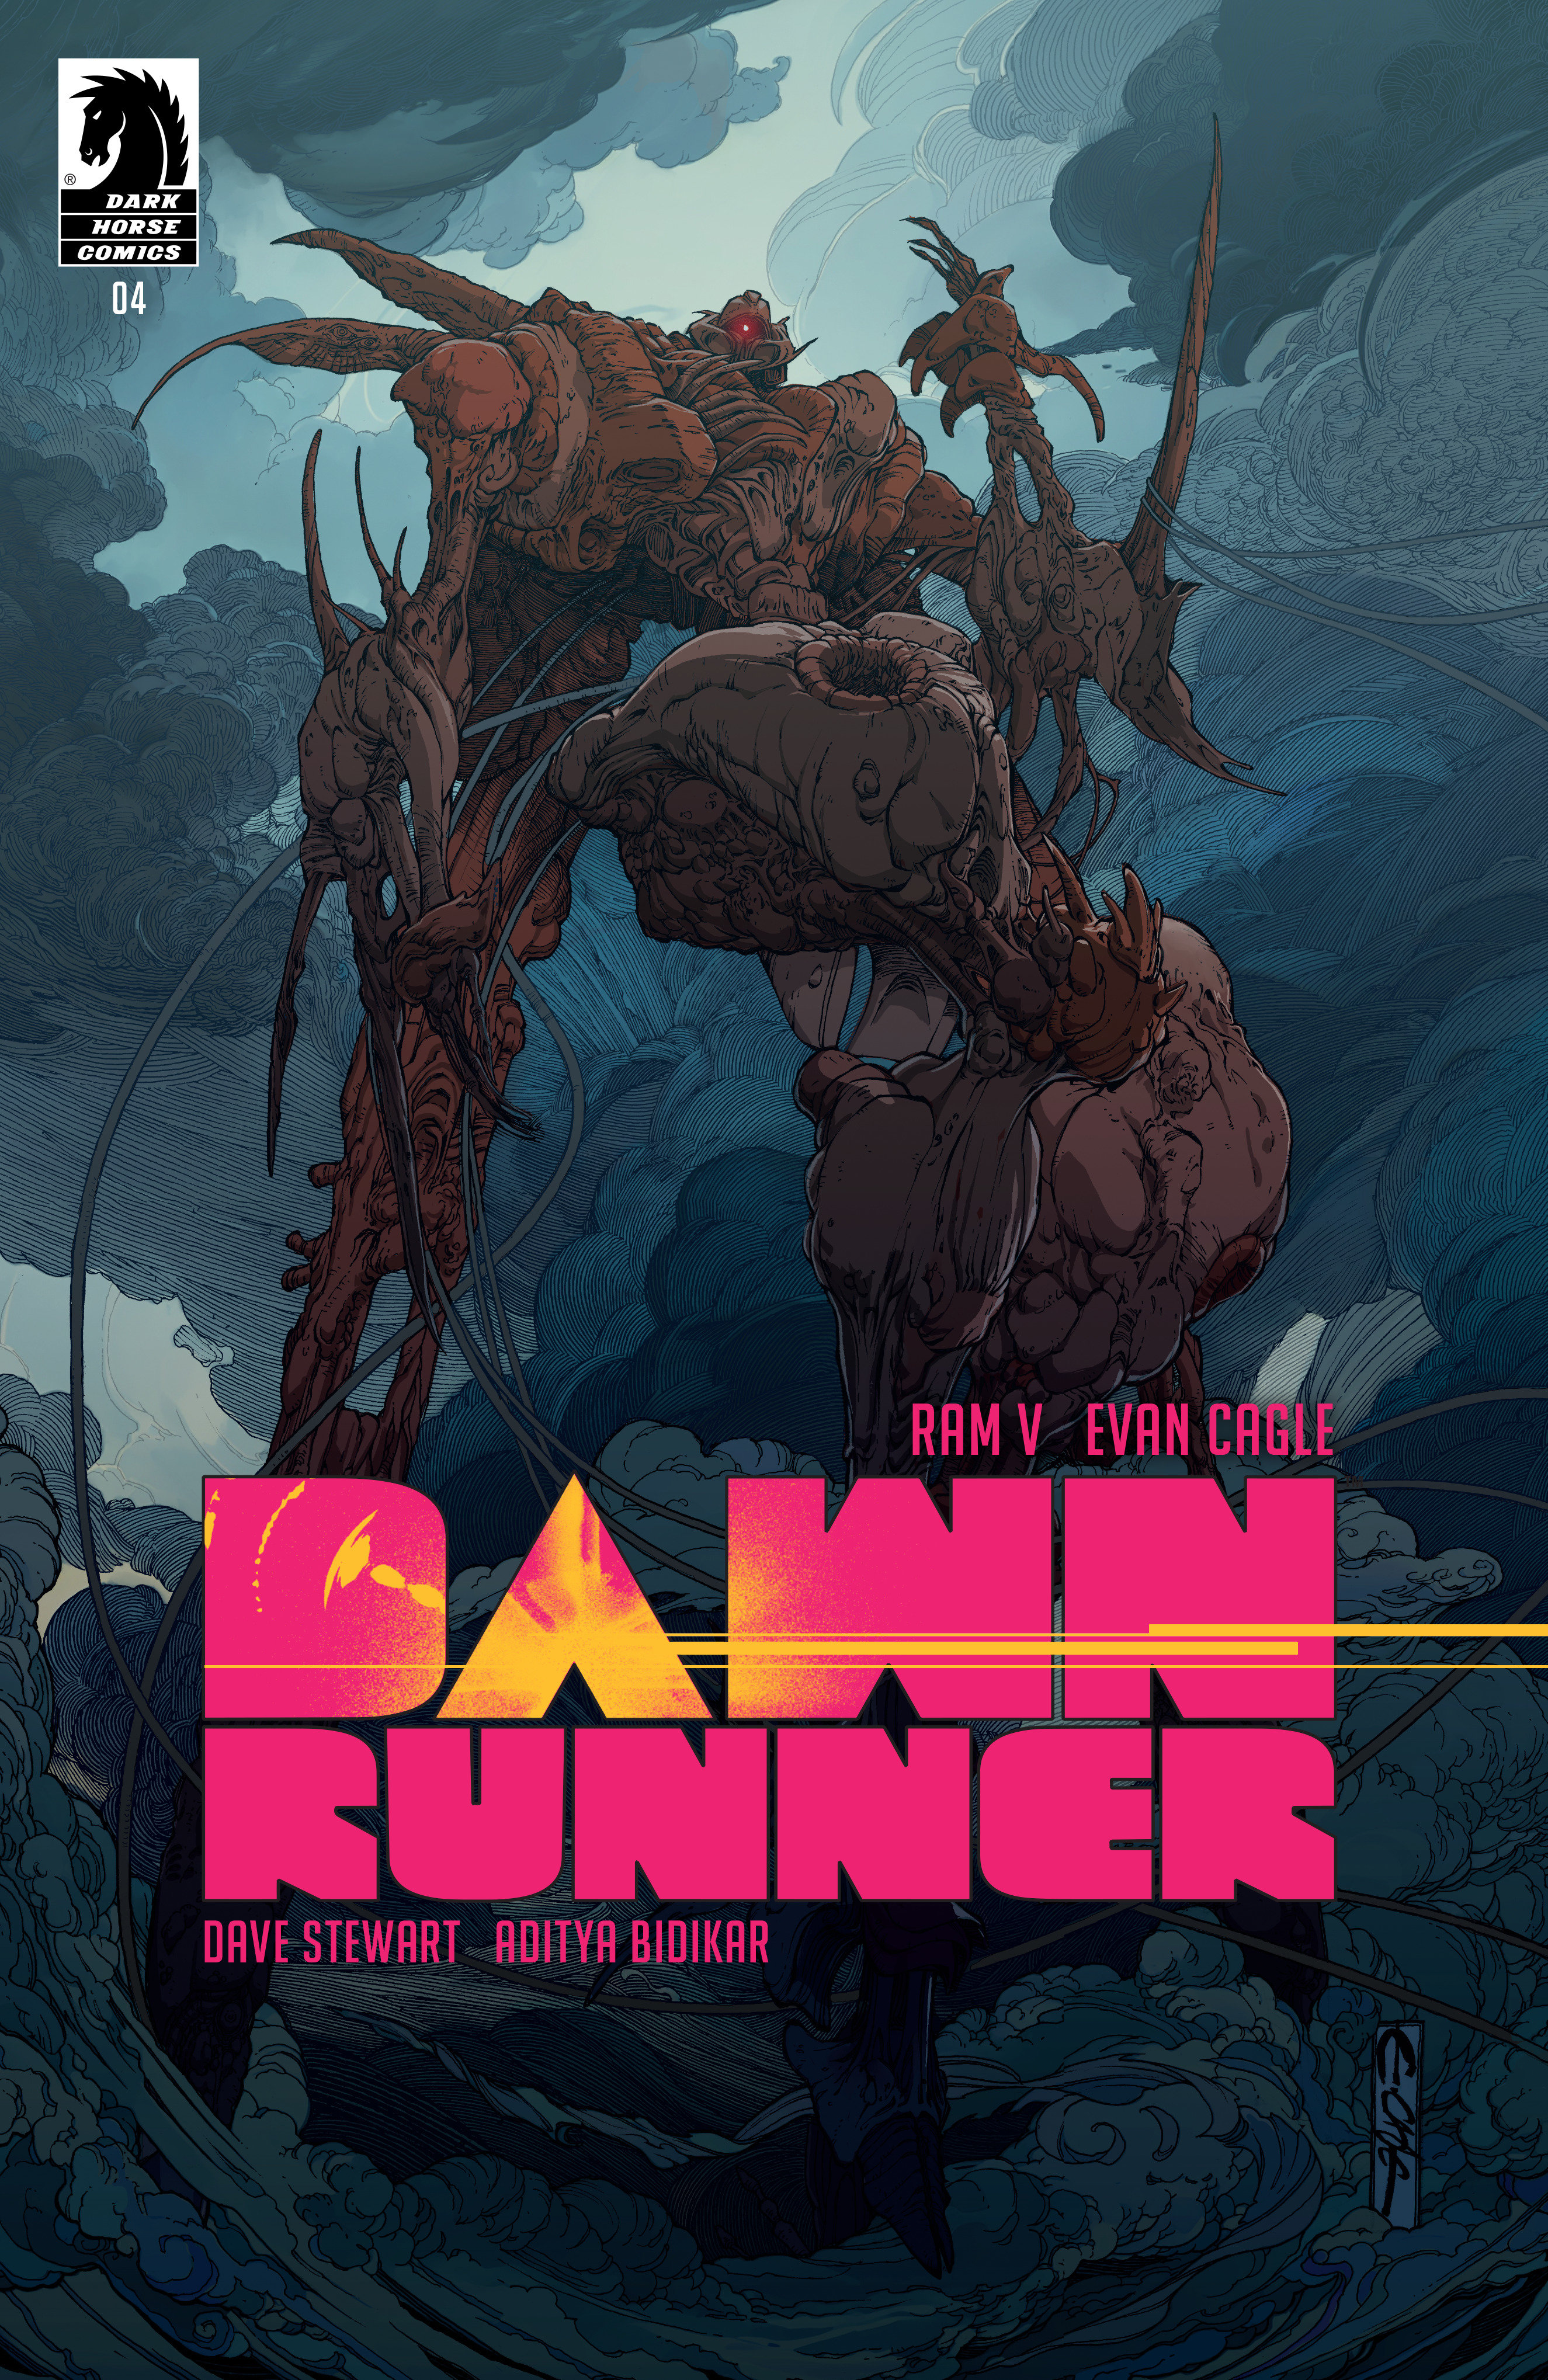 Dawnrunner #4 Cover A Cagle